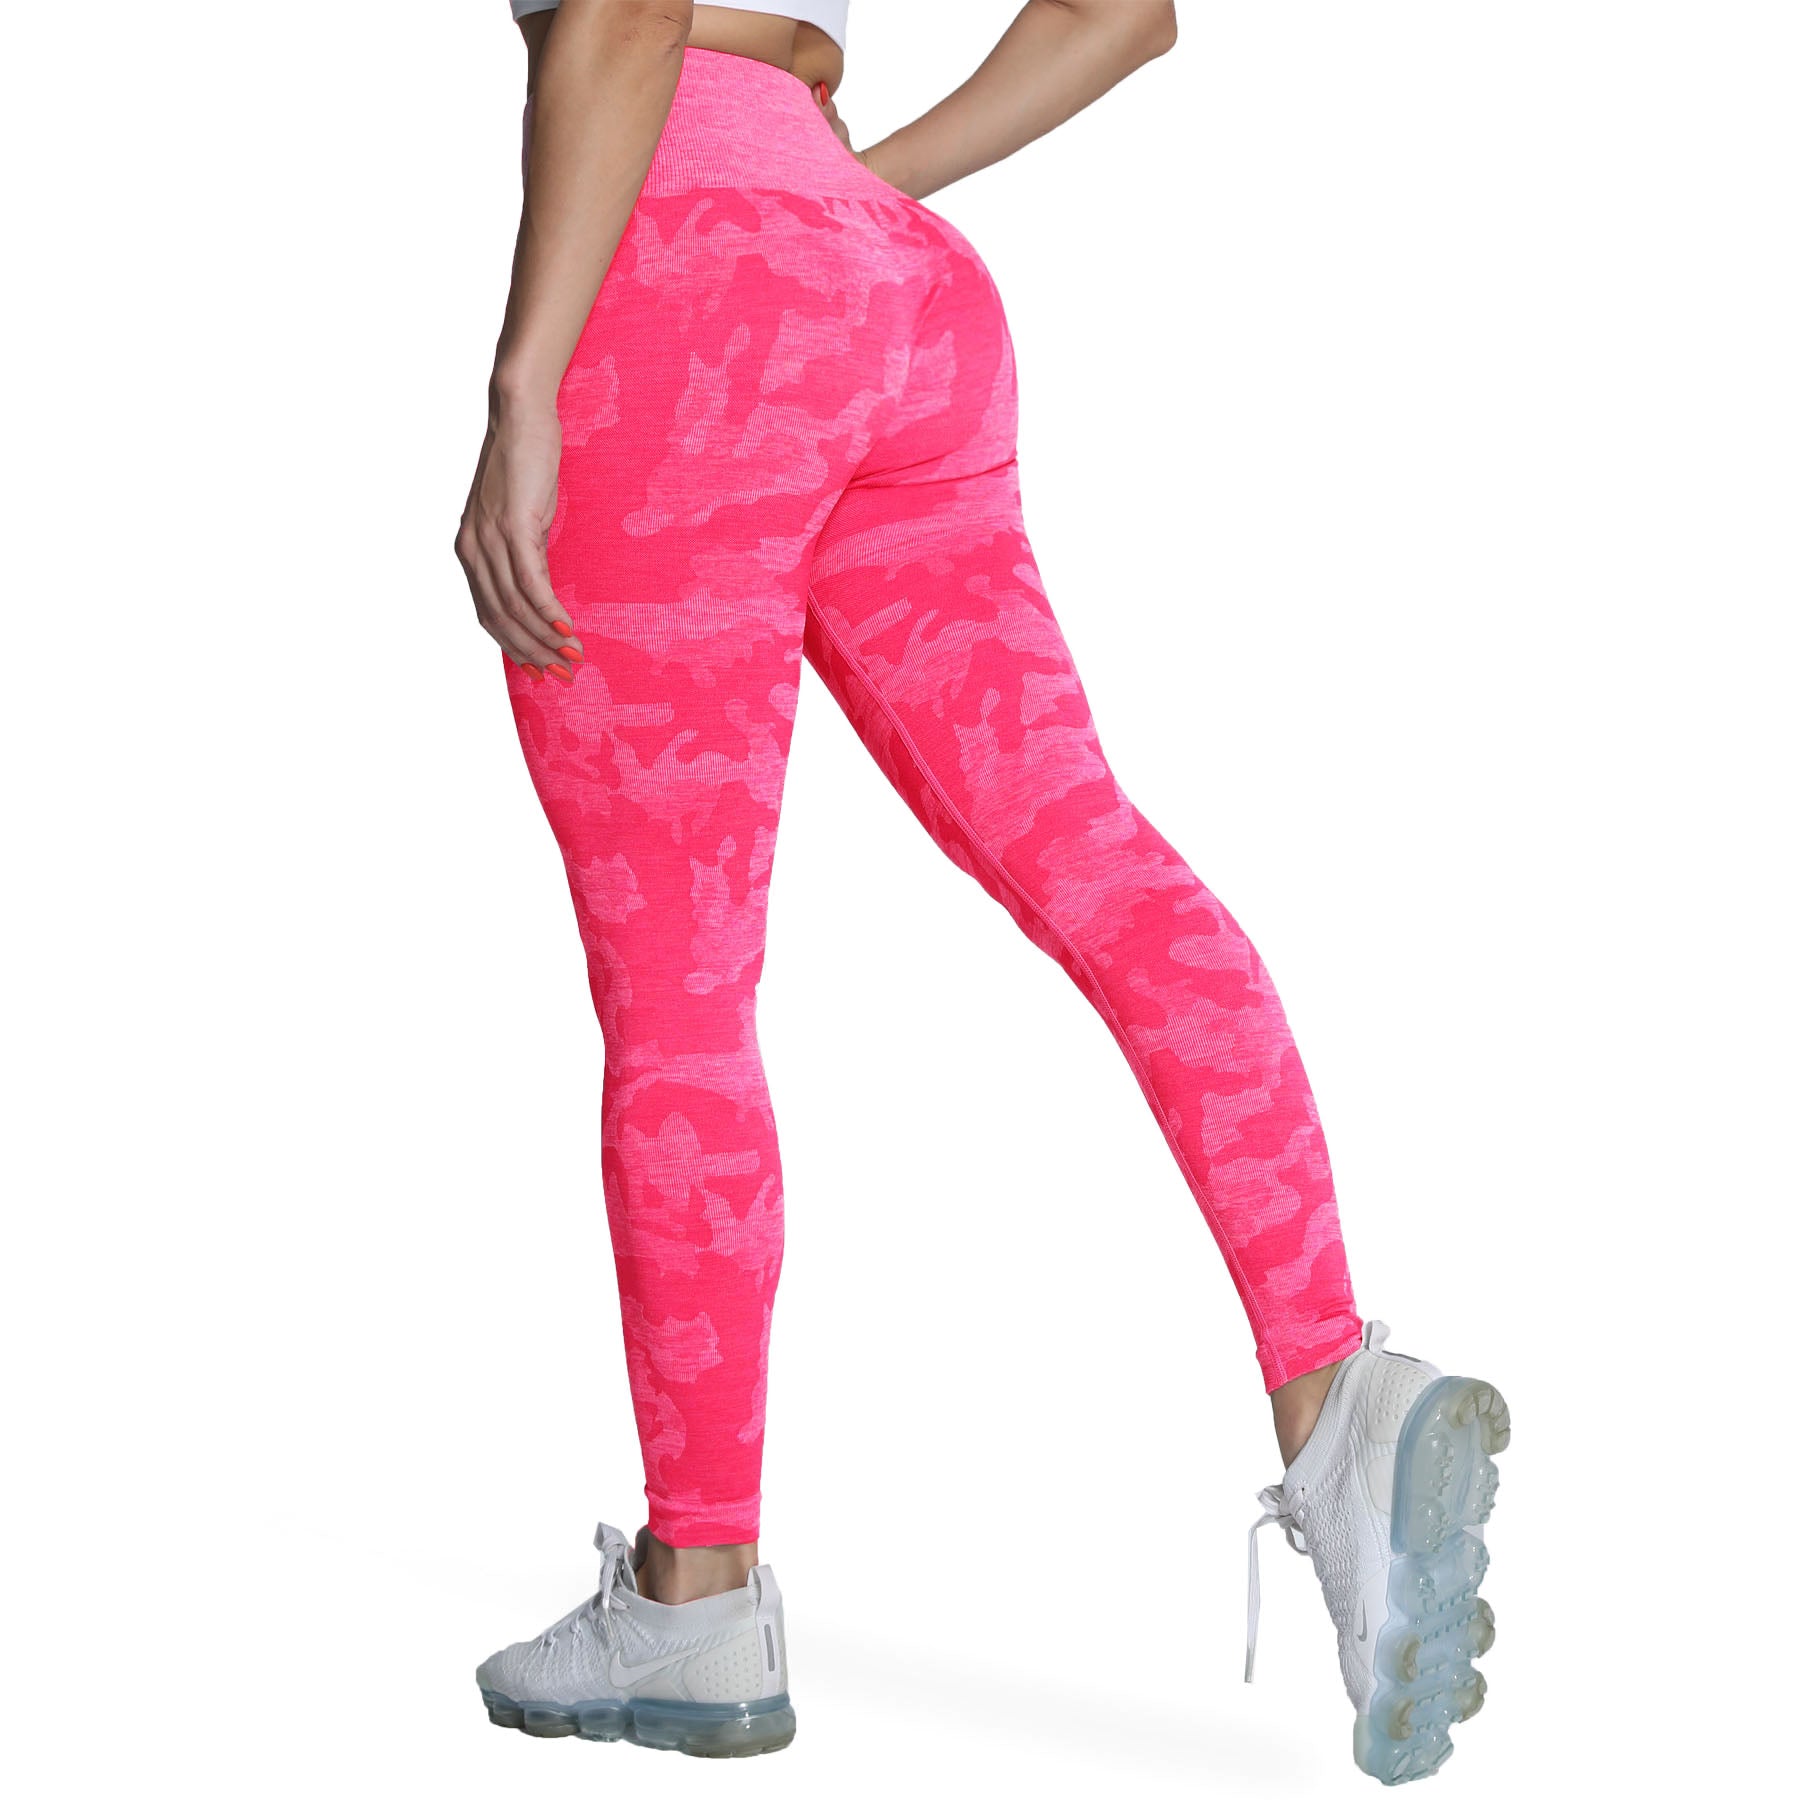 Aoxjox seamless leggings, Electric blue marl (S) and Aoxjox black hype